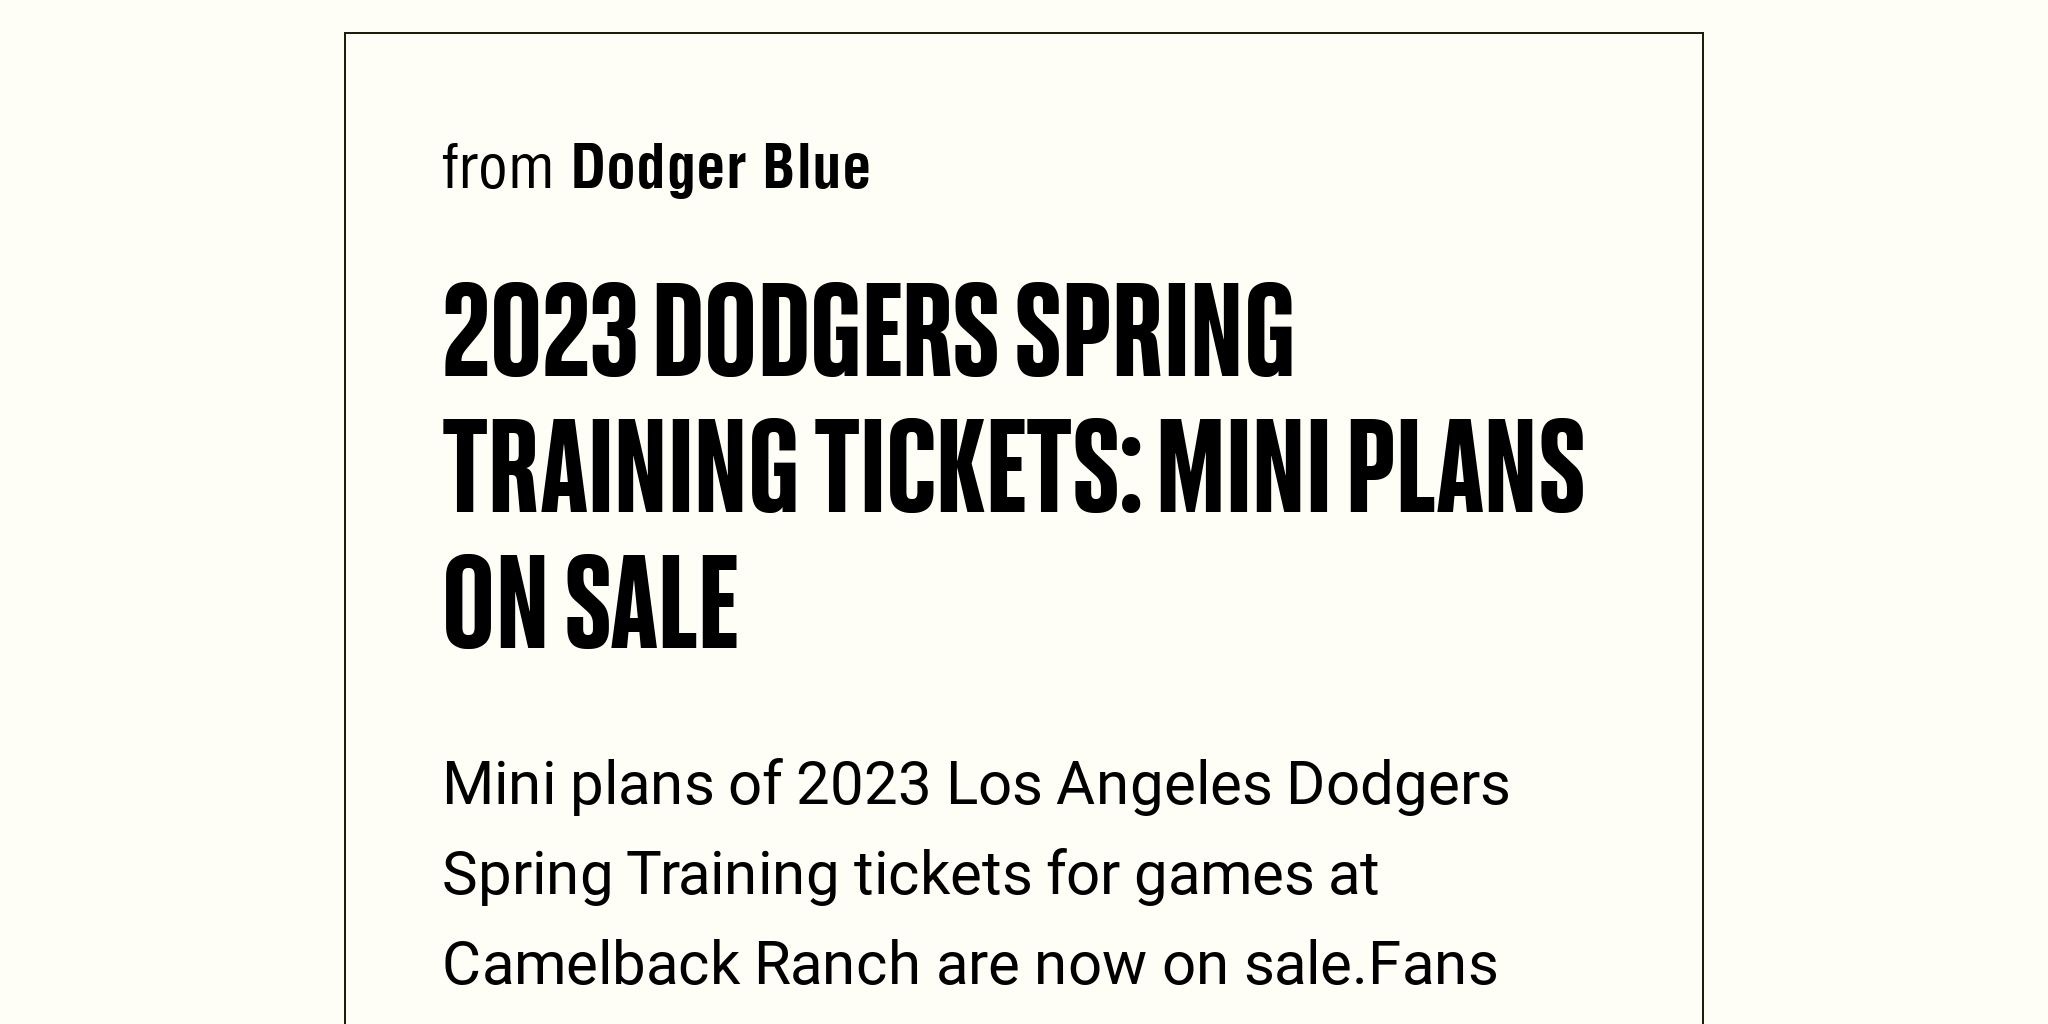 2023 Dodgers Spring Training Tickets Mini Plans On Sale Briefly